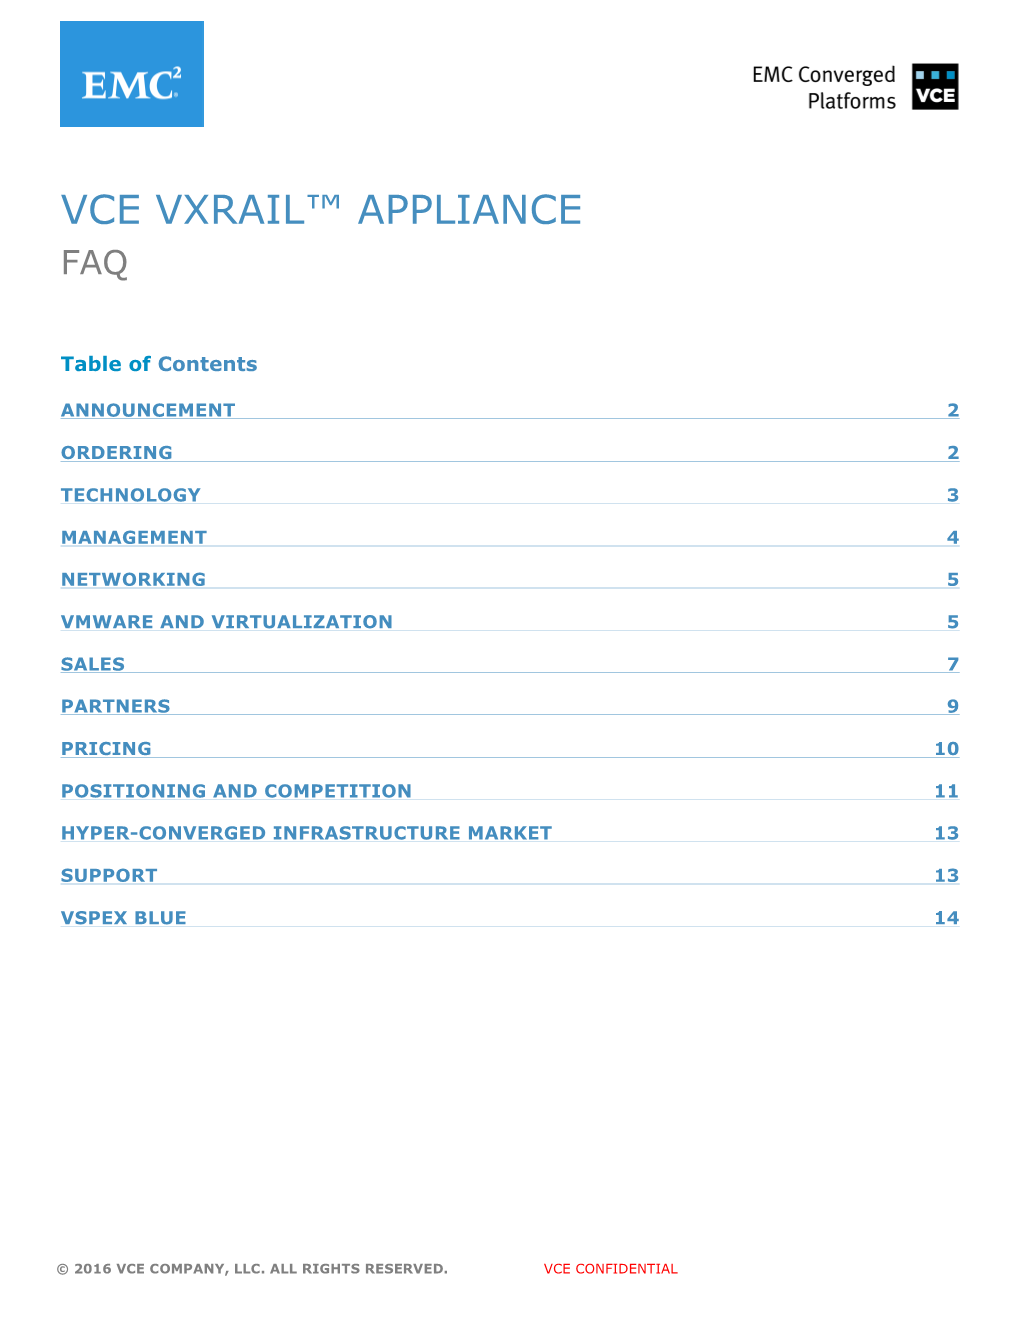 VCE Vxrail Appliances Be Orderable and Generally Available?